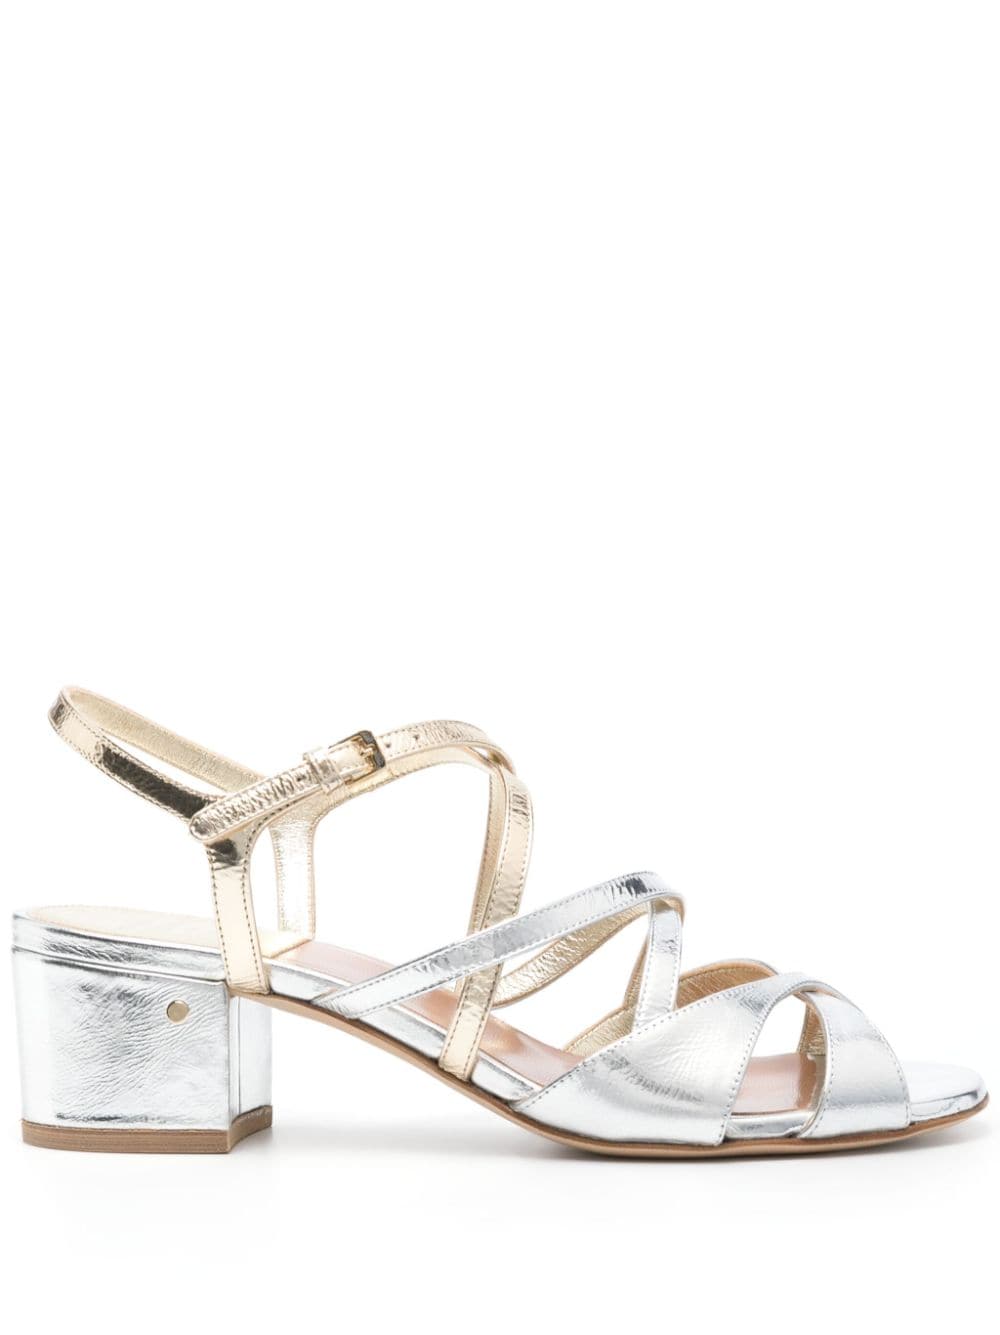 LAURENCE DACADE JANET 55MM LEATHER SANDALS